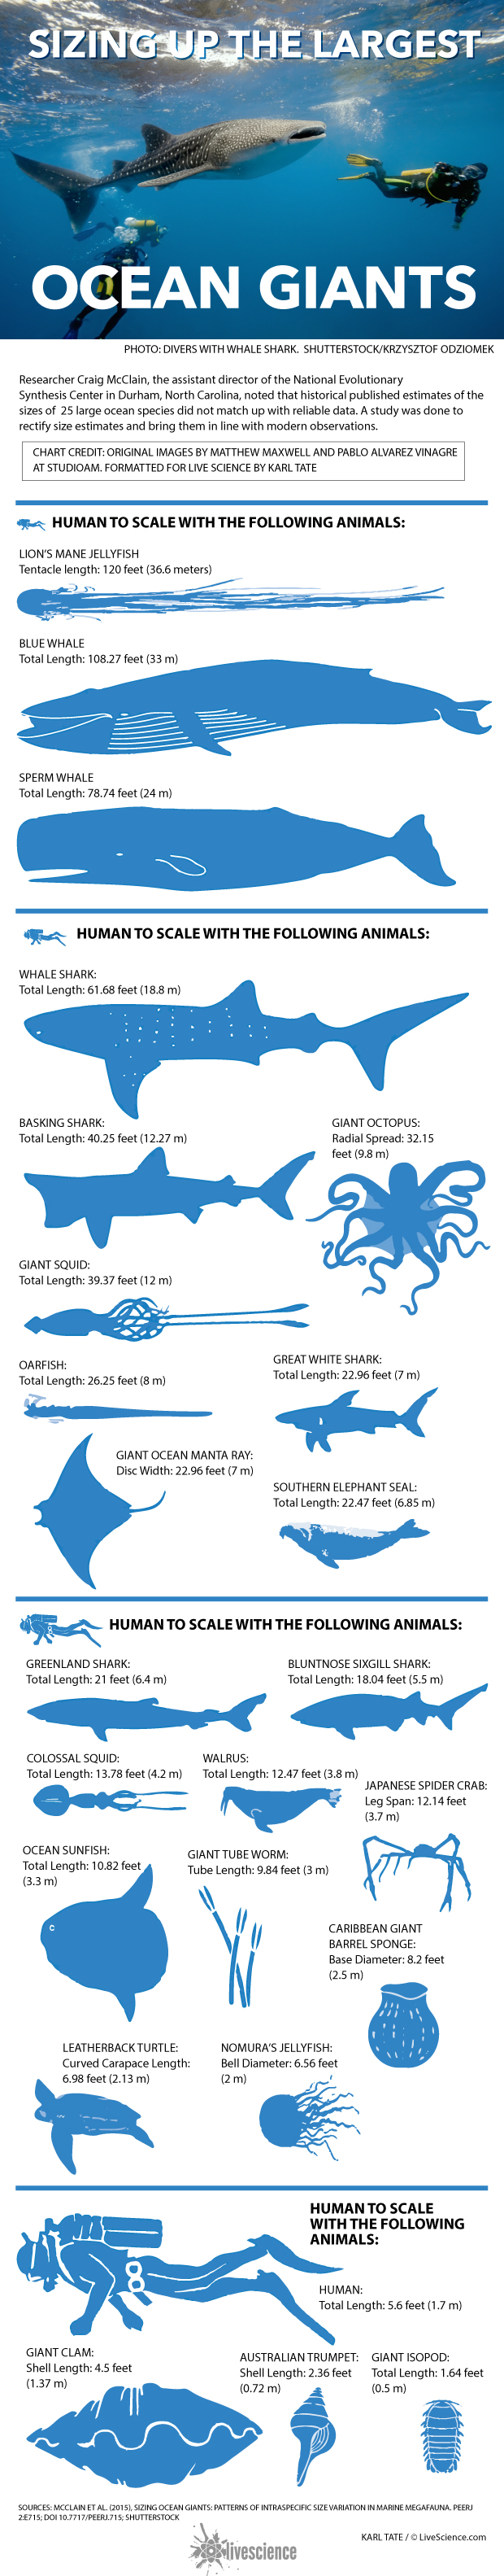 New Size Estimates for Large Ocean Animals (Infographic) | Live Science